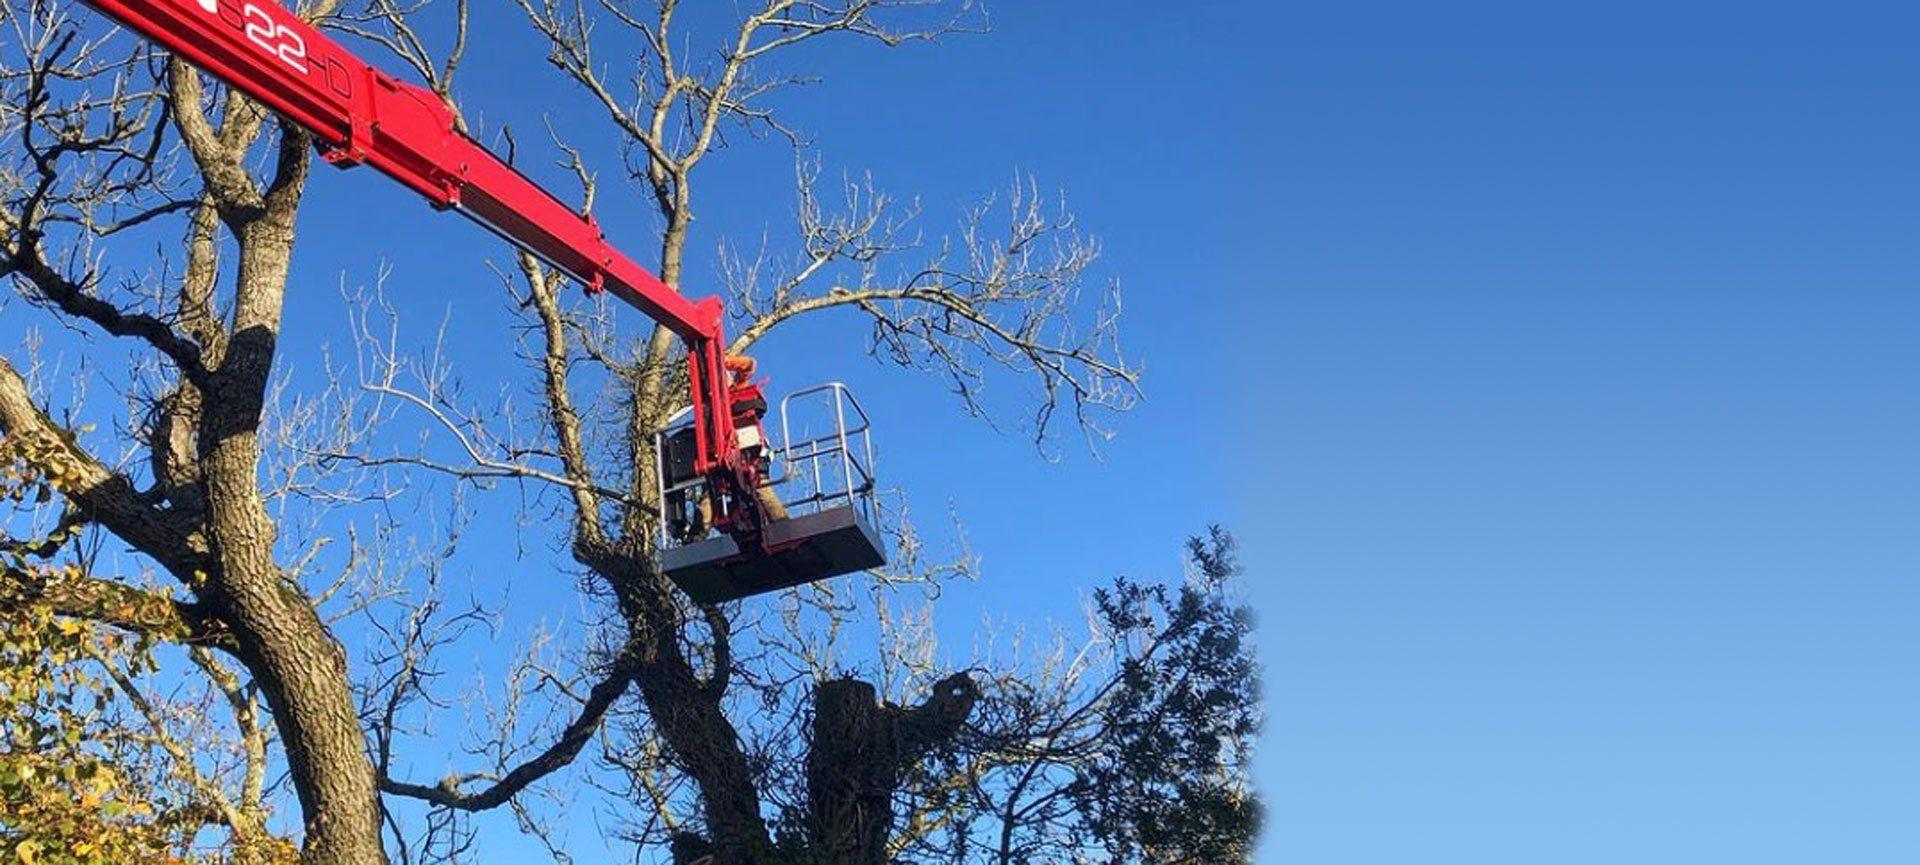 Welcome to the tree management company tree surgeons in dorset and hampshire